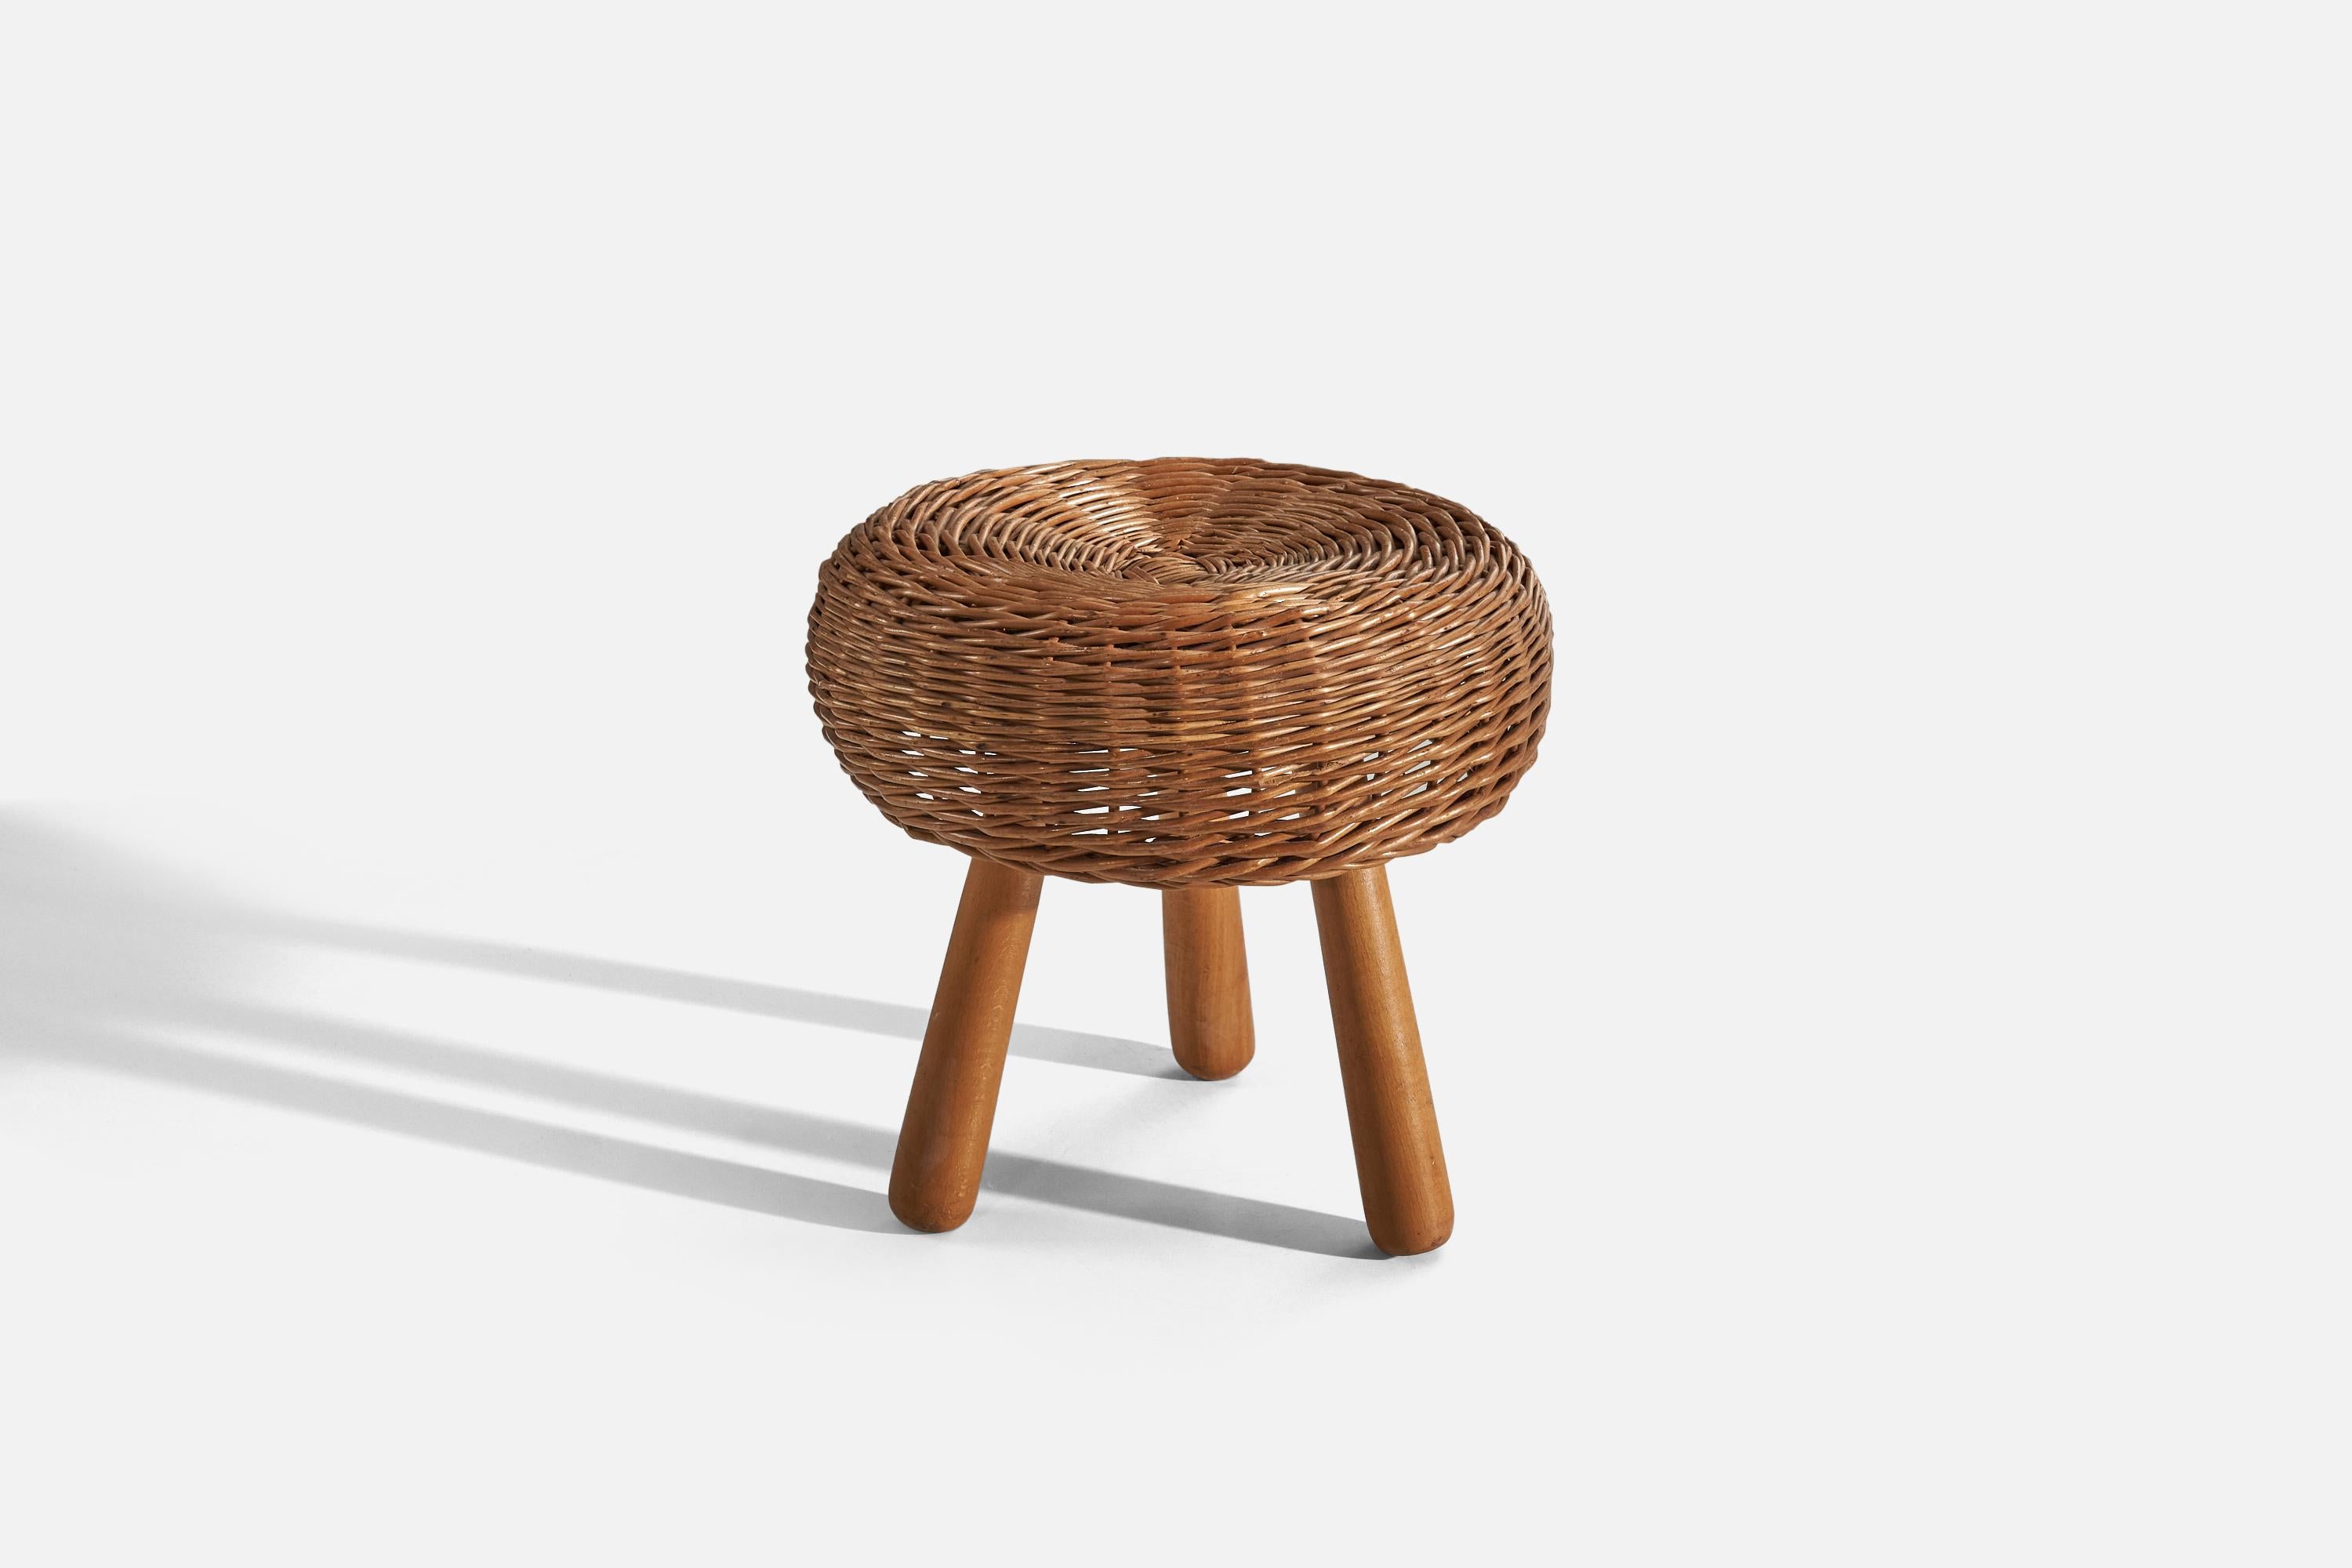 Mid-Century Modern Tony Paul, “Attributed” Stool, Wicker, Wood, United States, 1950s For Sale